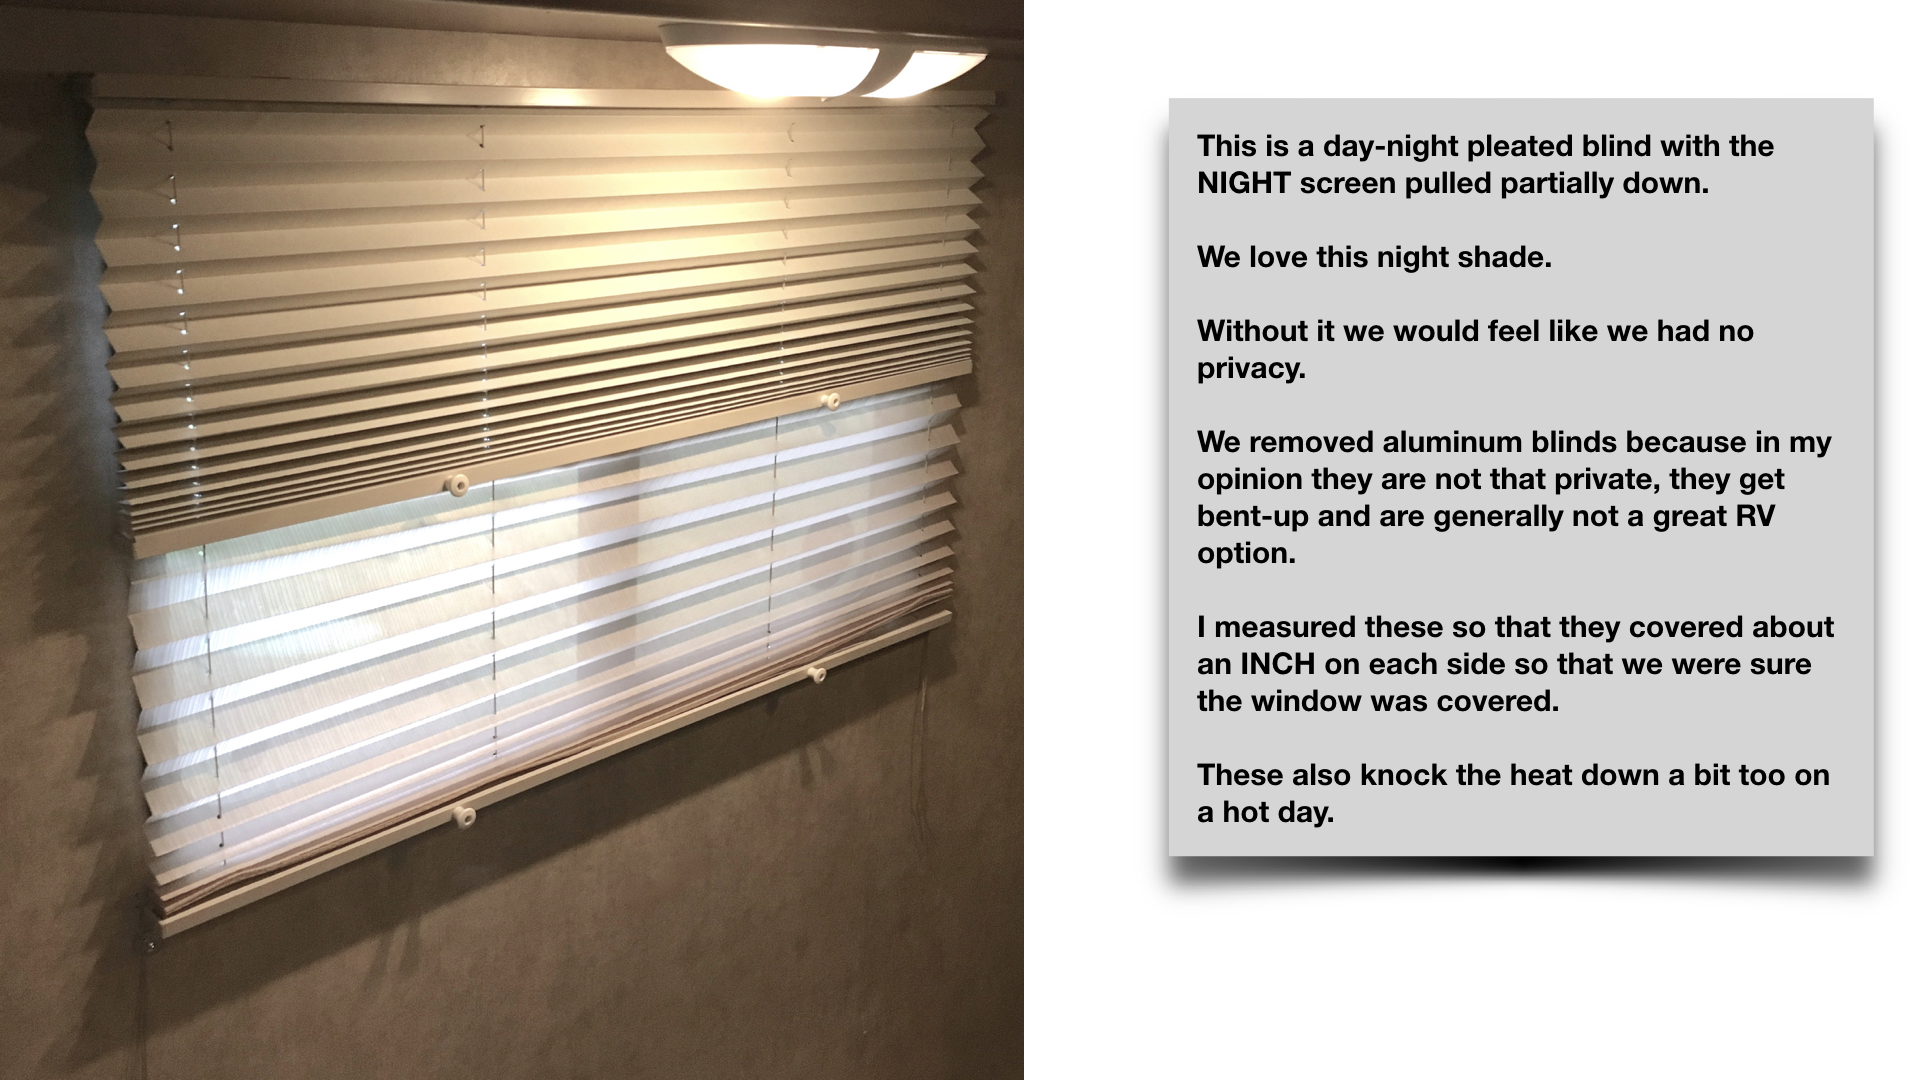 RV shade with day night - night screen partially closed